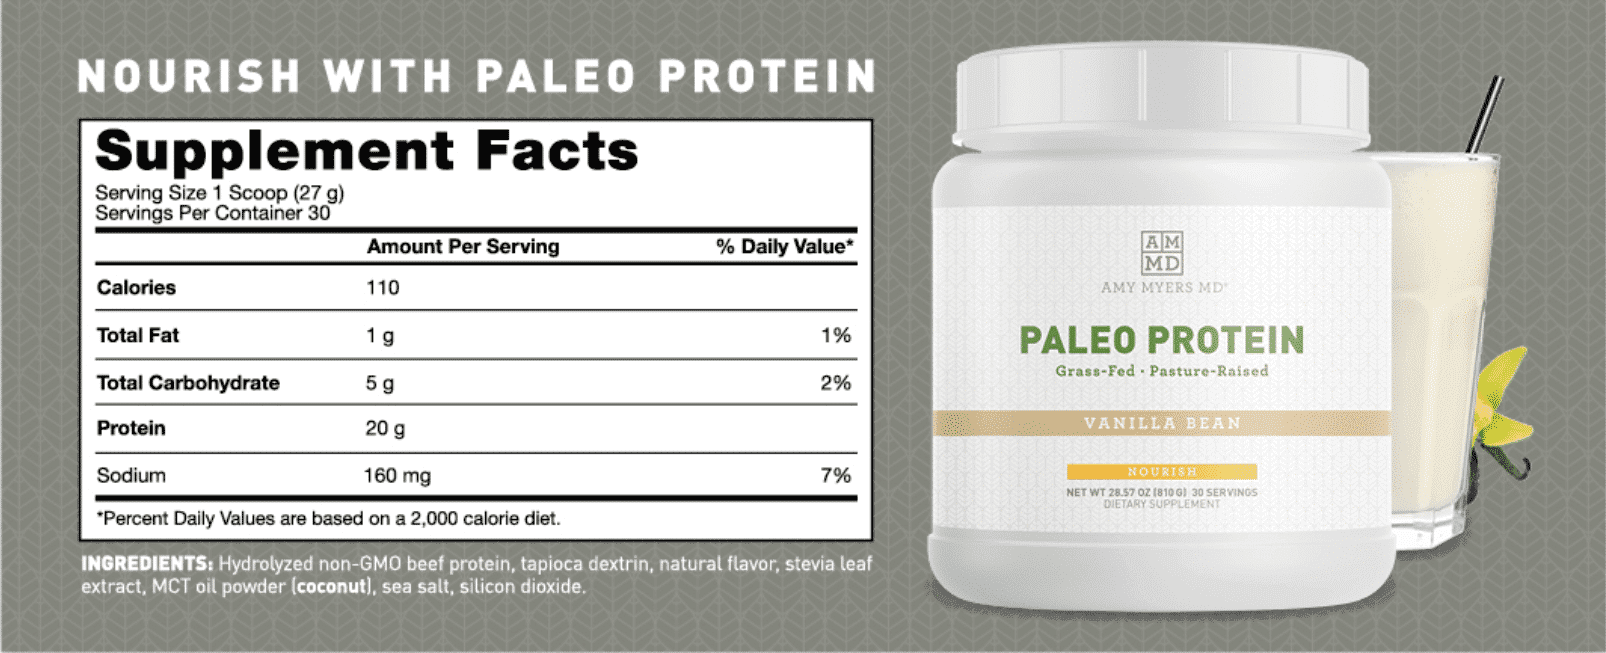 Paleo Protein product and its supplement facts: calories per serving 110, total fat per serving 1g, total carbohydrate per serving 5g, protein per serving 20g, sodium per serving 160mg. serving size 1 scoop, 30 servings per container. Ingredients: Hydrolyzed non-GMO beef protein, tapioca dextrin, natural flavor, stevia leaf extract, MCT oil powder(coconut), sea salt, silicon dioxide.